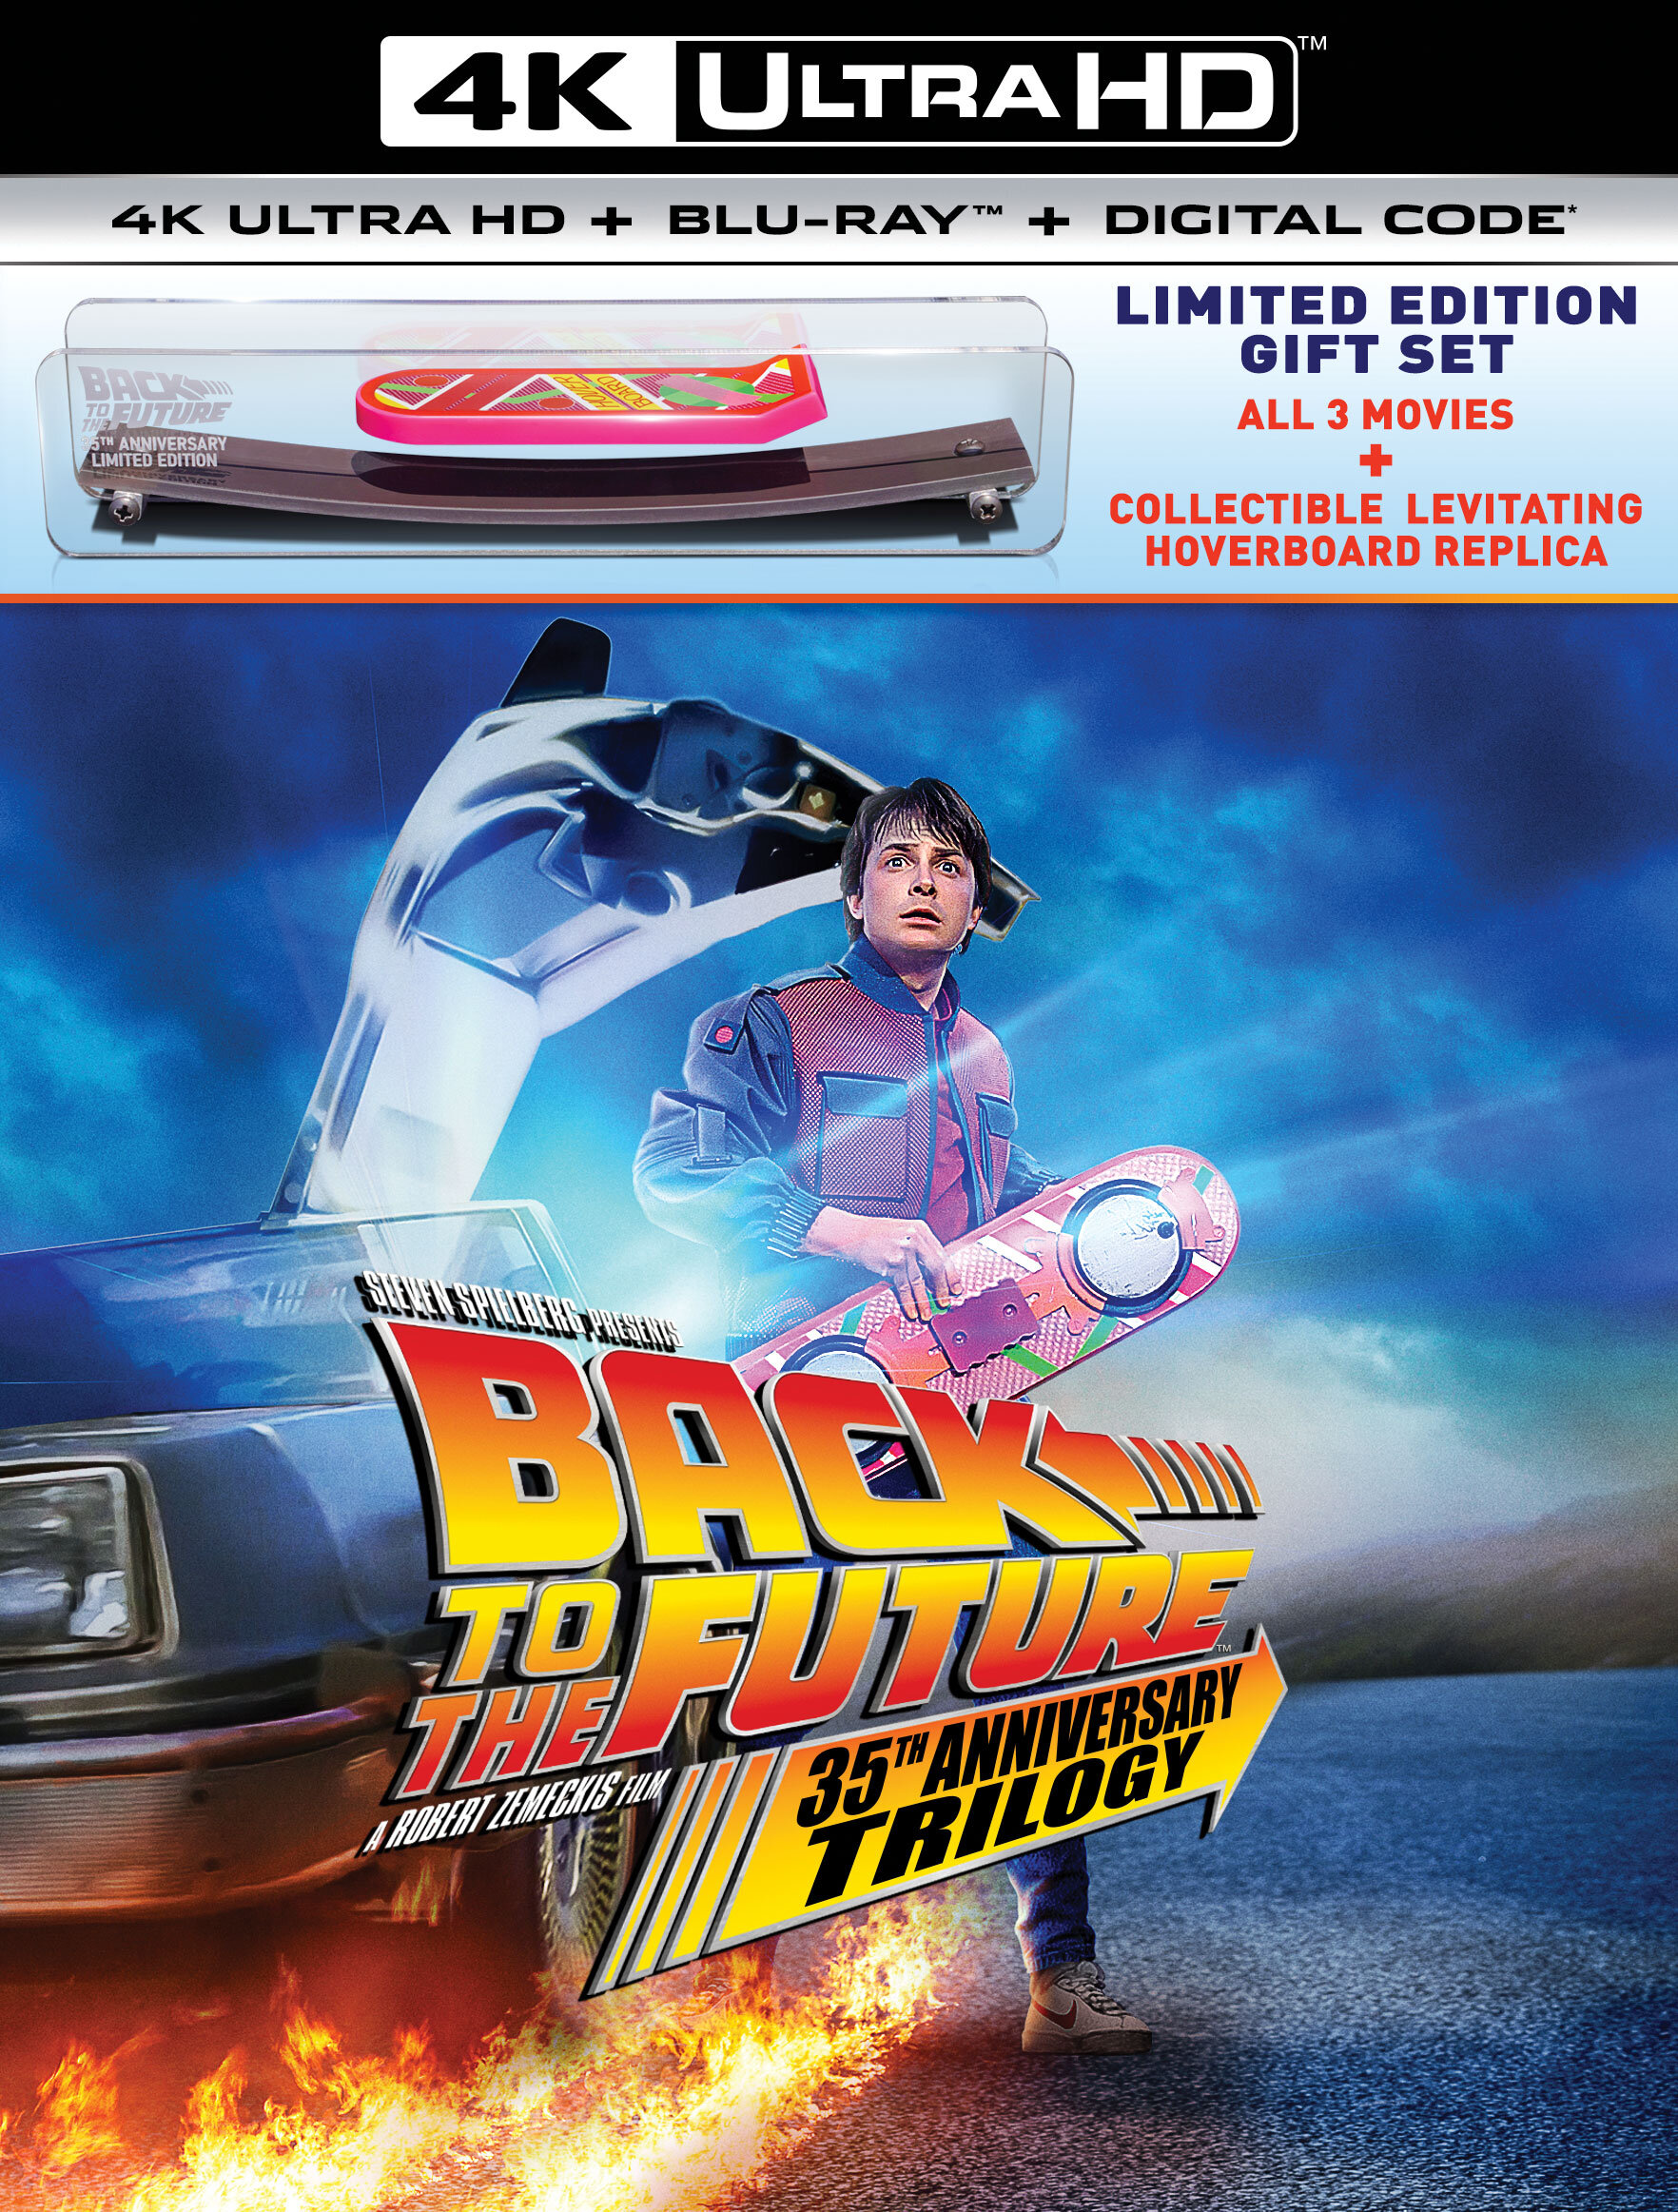 Back to the Future: 35th Anniversary Trilogy Limited Edition Gift Set (4K UHD + Blu-ray + Digital + Hoverboard) – Amazon Exclusive